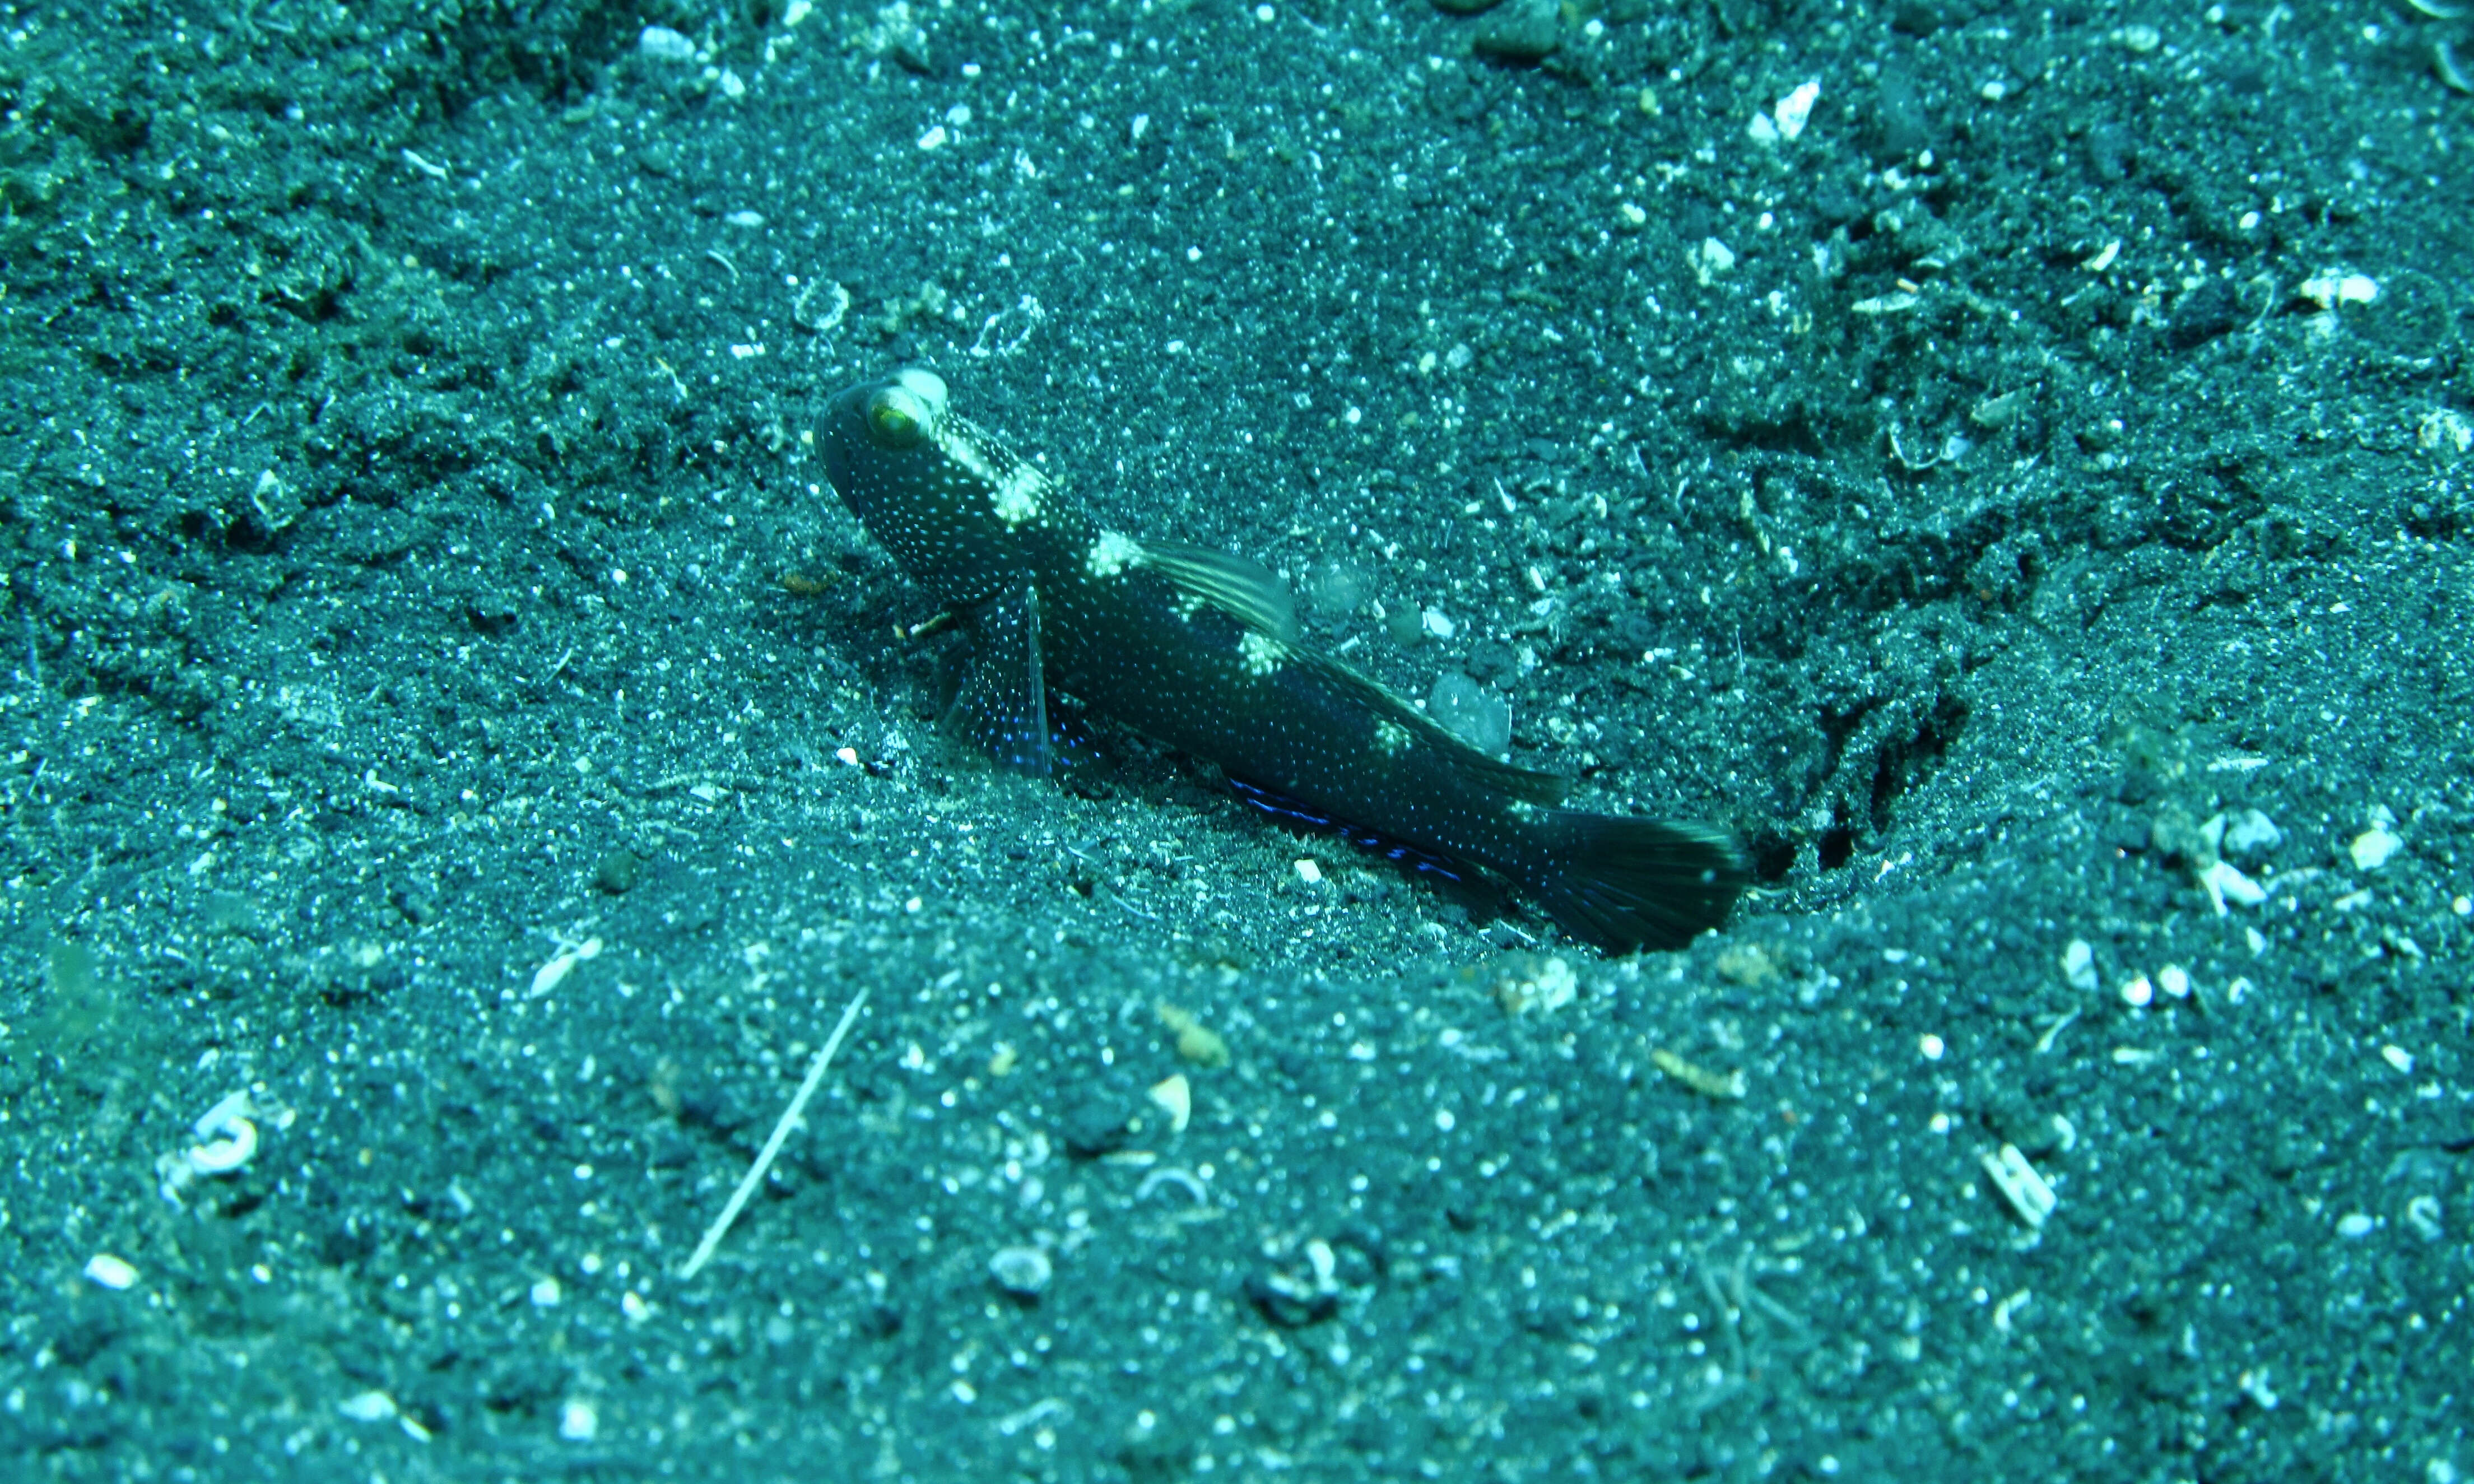 Image of Watchman goby